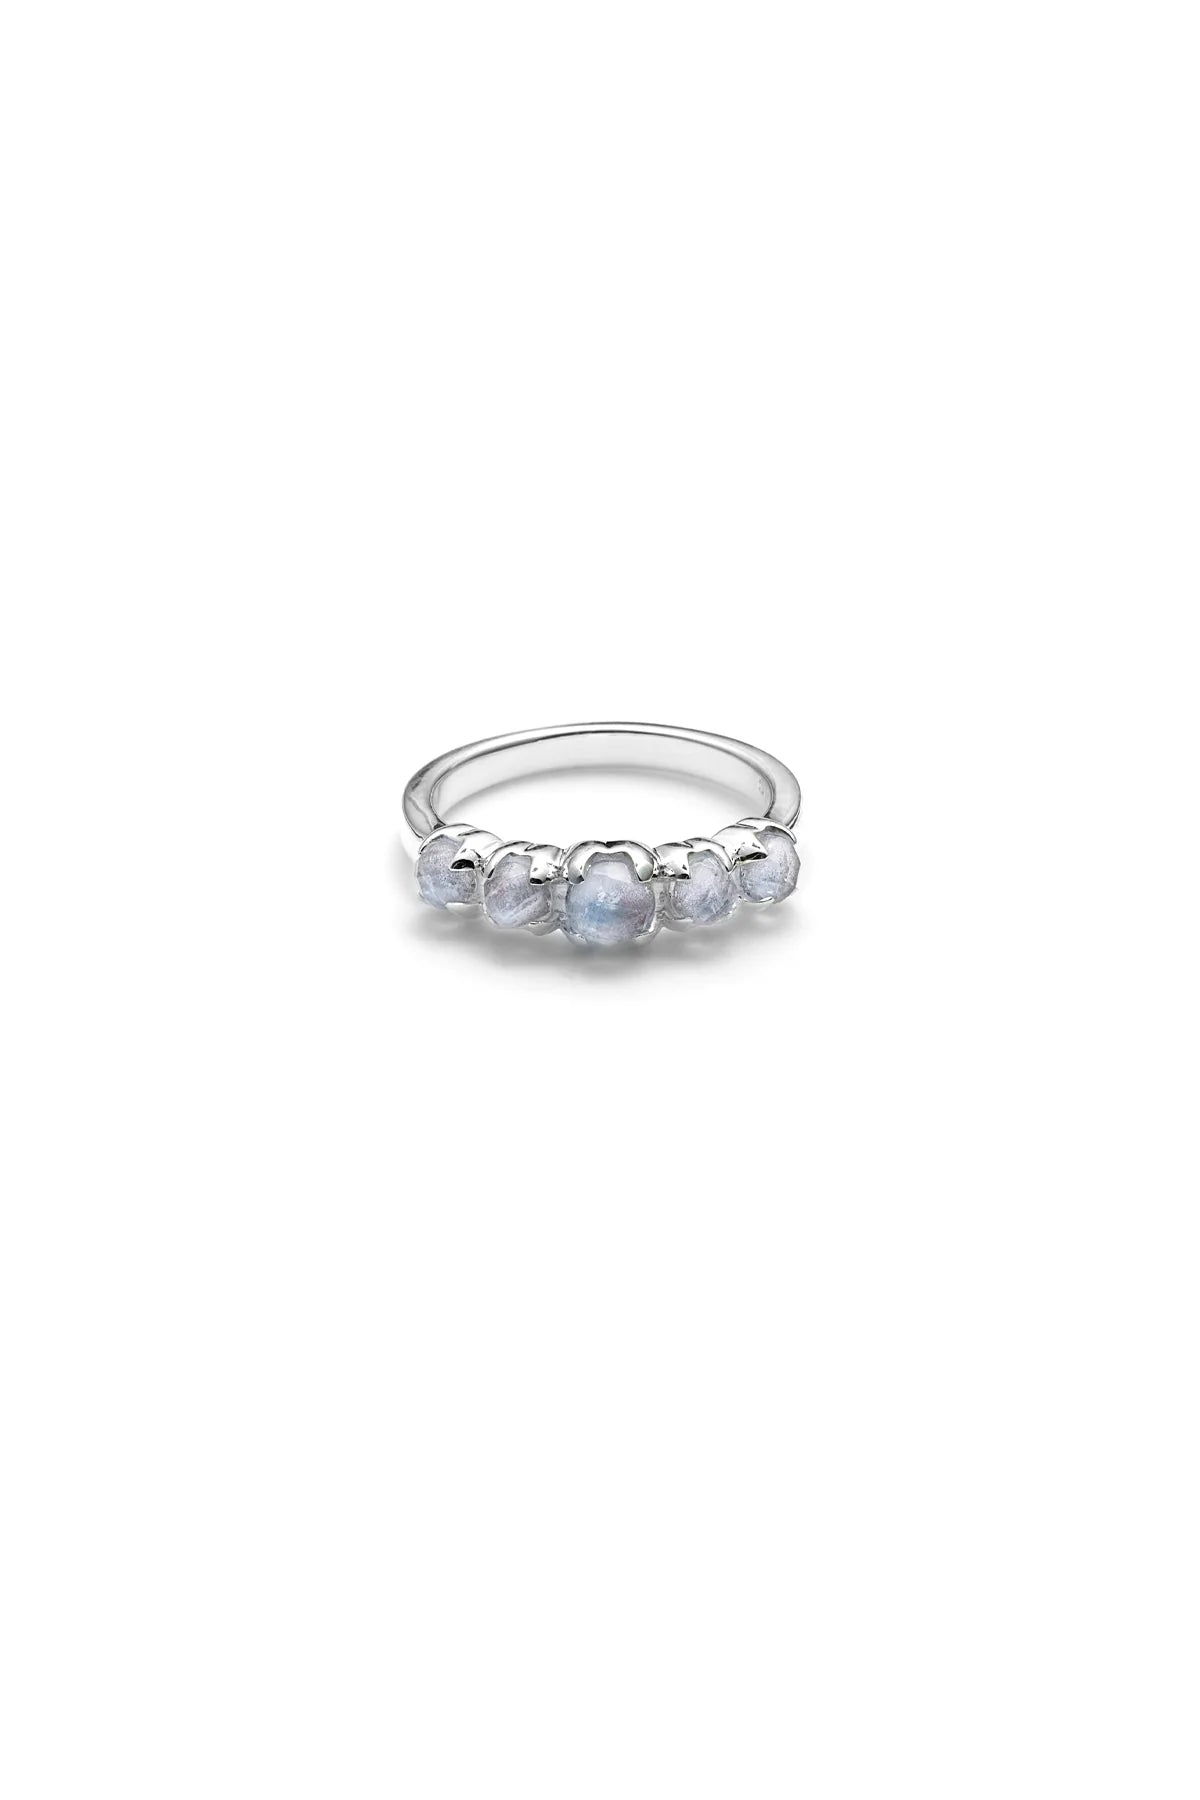 Halo Cluster Ring - Moonstone - Size Q